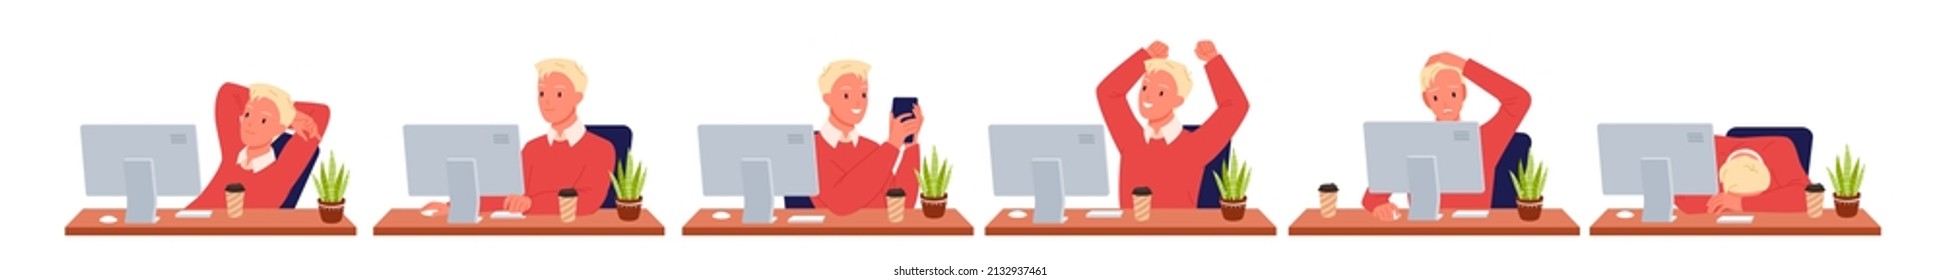 Man working online on business project in different poses vector illustration. Cartoon happy and sad guy using gadget, person sitting at personal office computer in modern workplace isolated on white